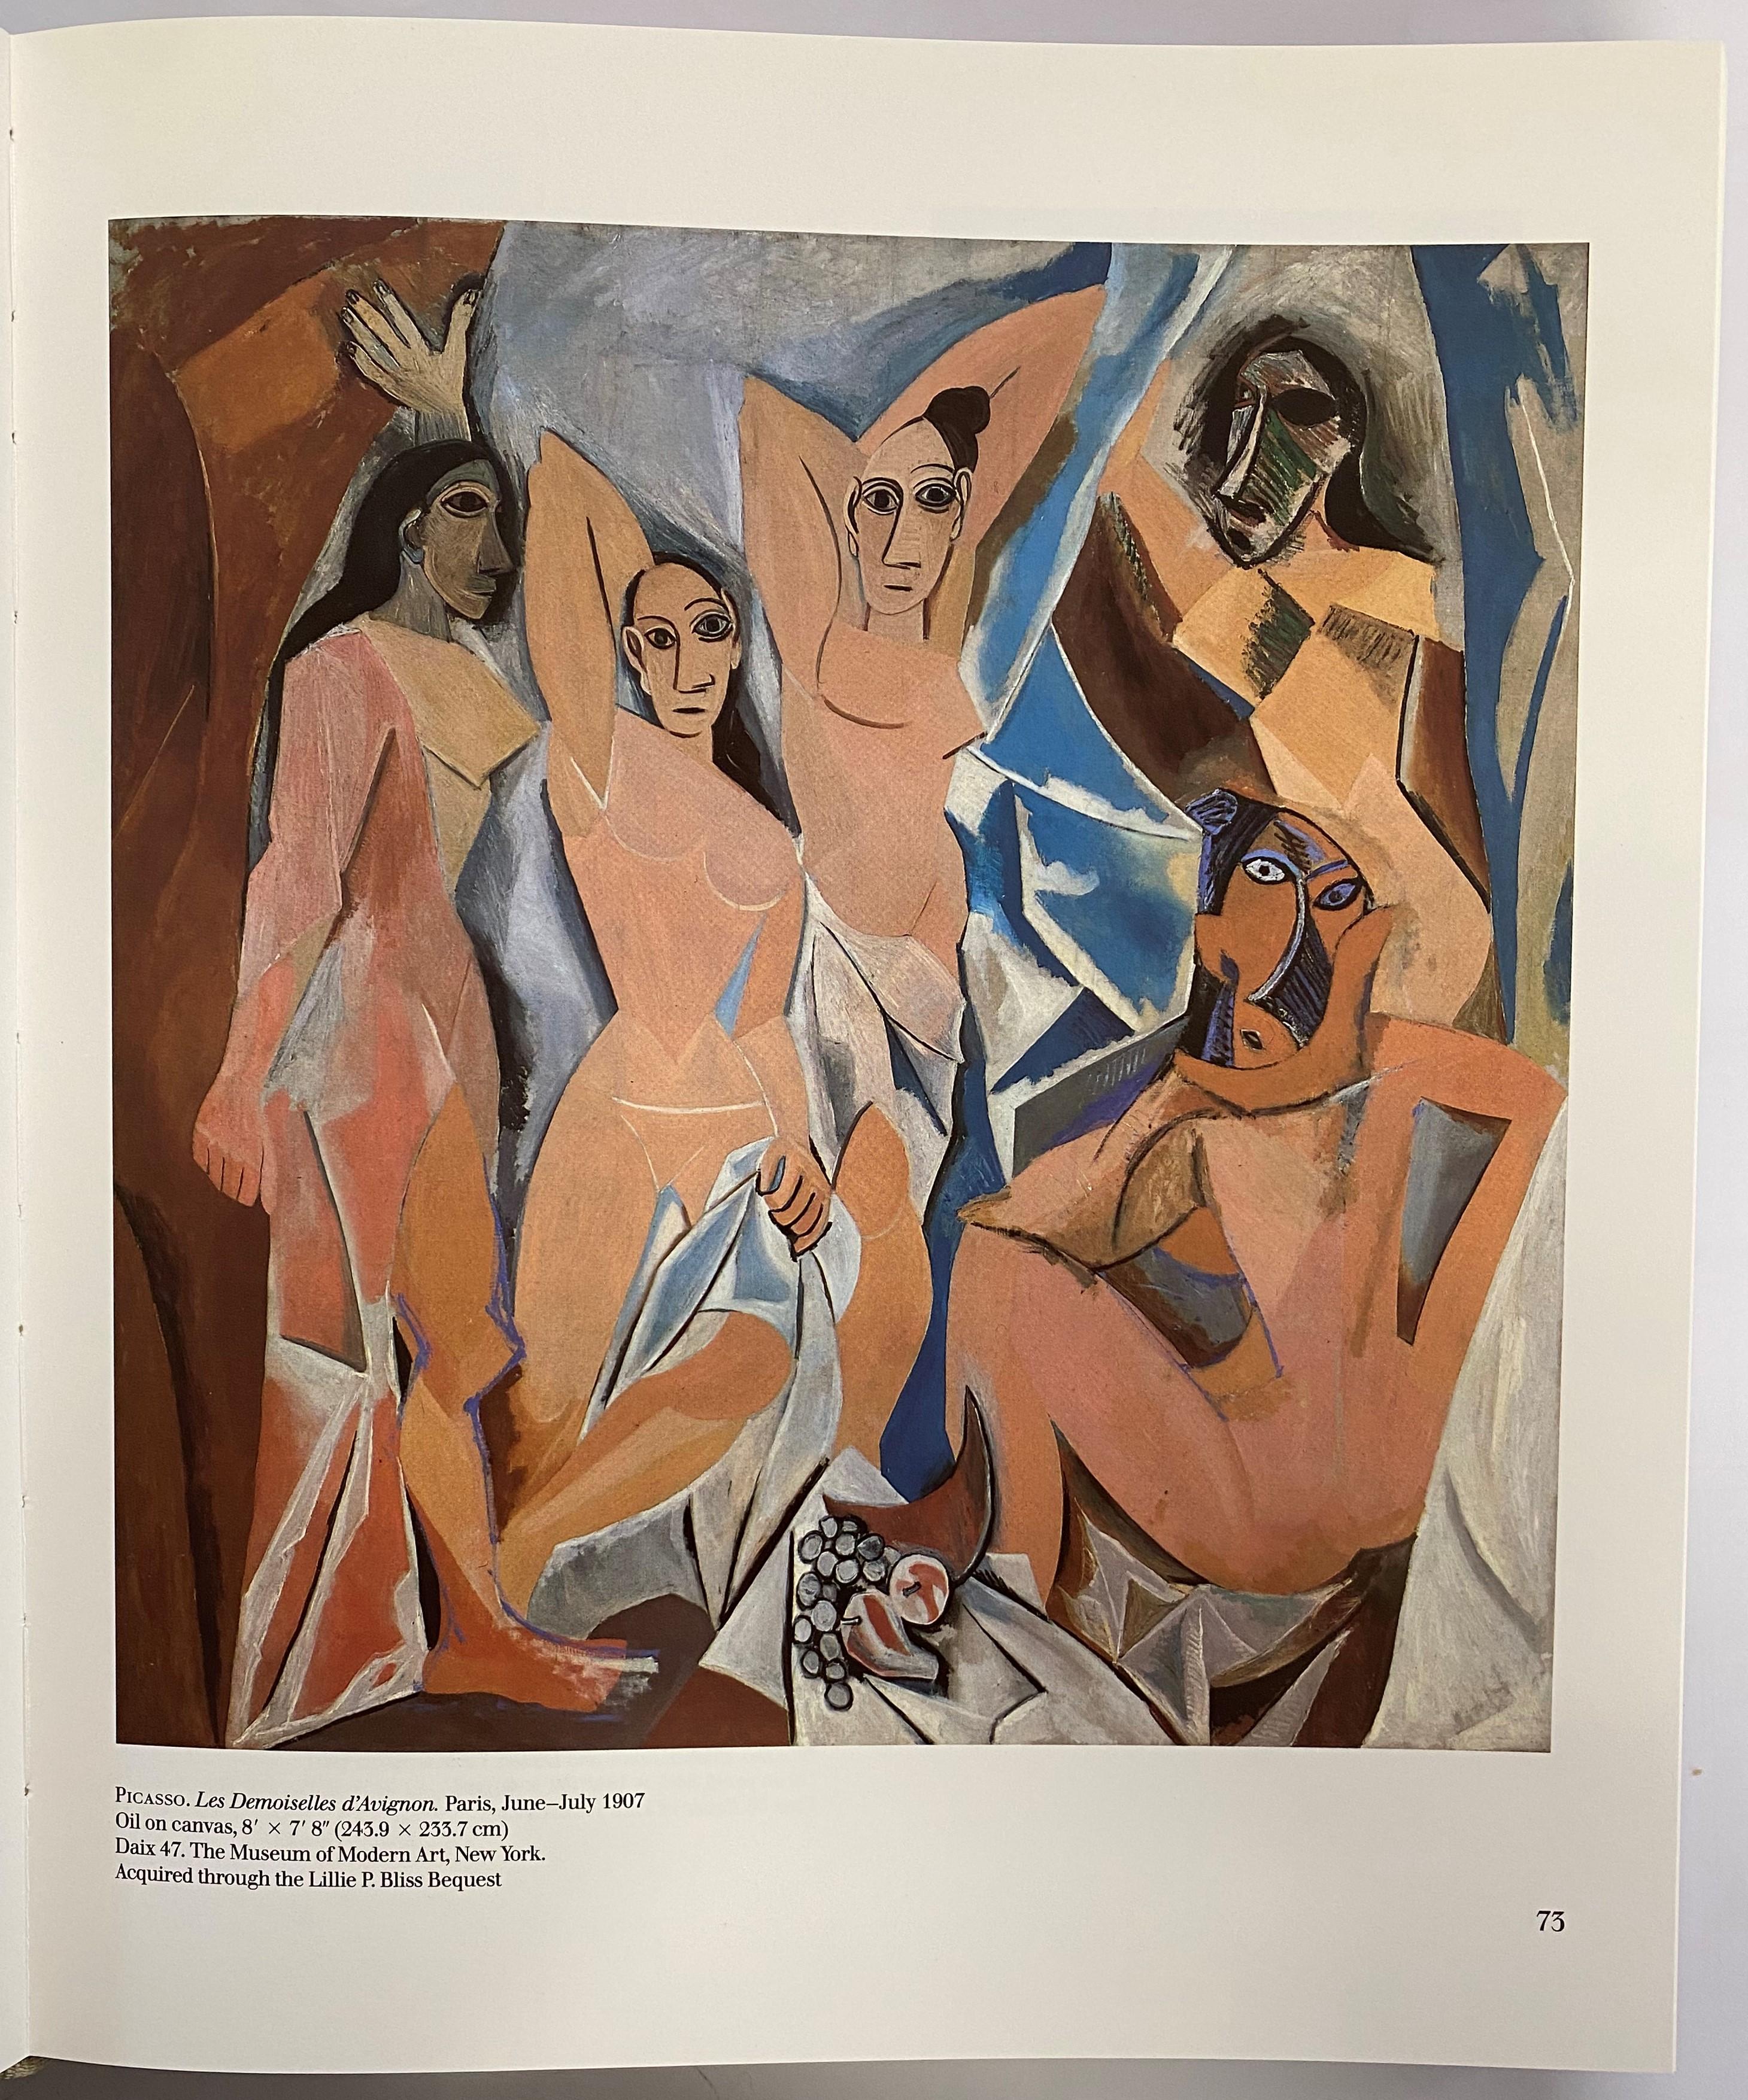 The unfolding of the Cubist idea in the years before World War I was perhaps the key episode in the development of modern art. Yet the fact that Cubism emerged from creative dialogue between two artists, extending over a period of more than six